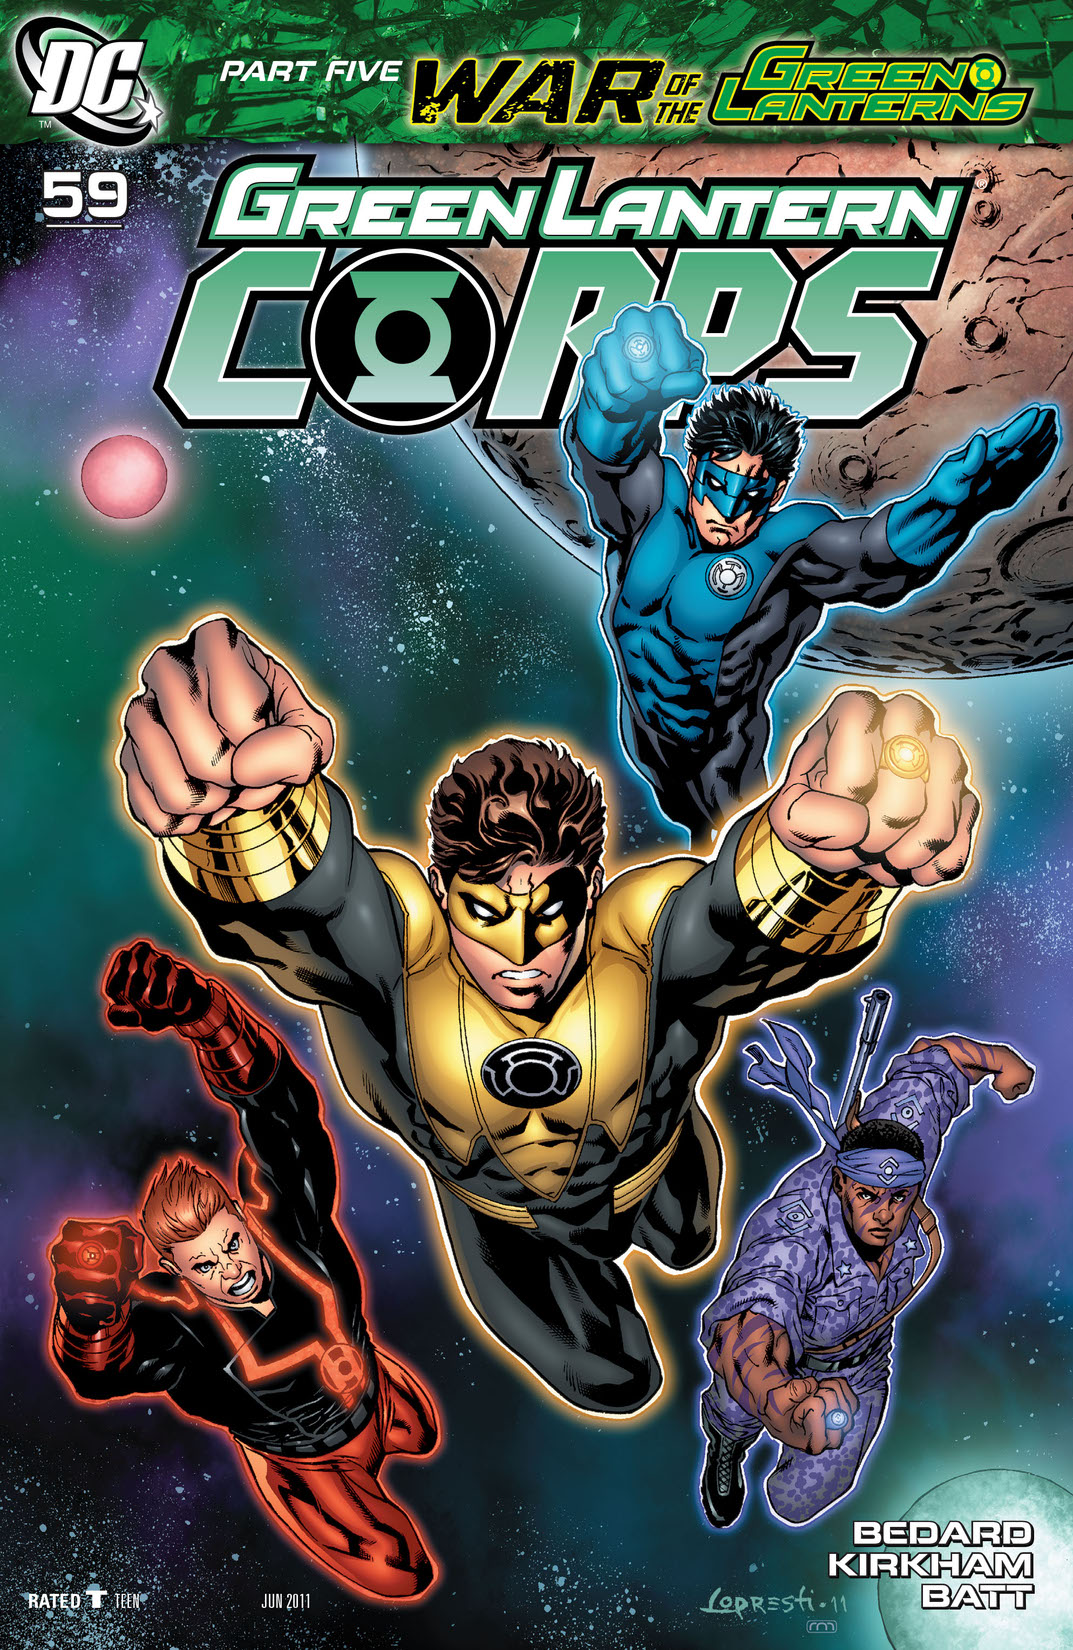 Green Lantern Corps (2006-) #59 preview images